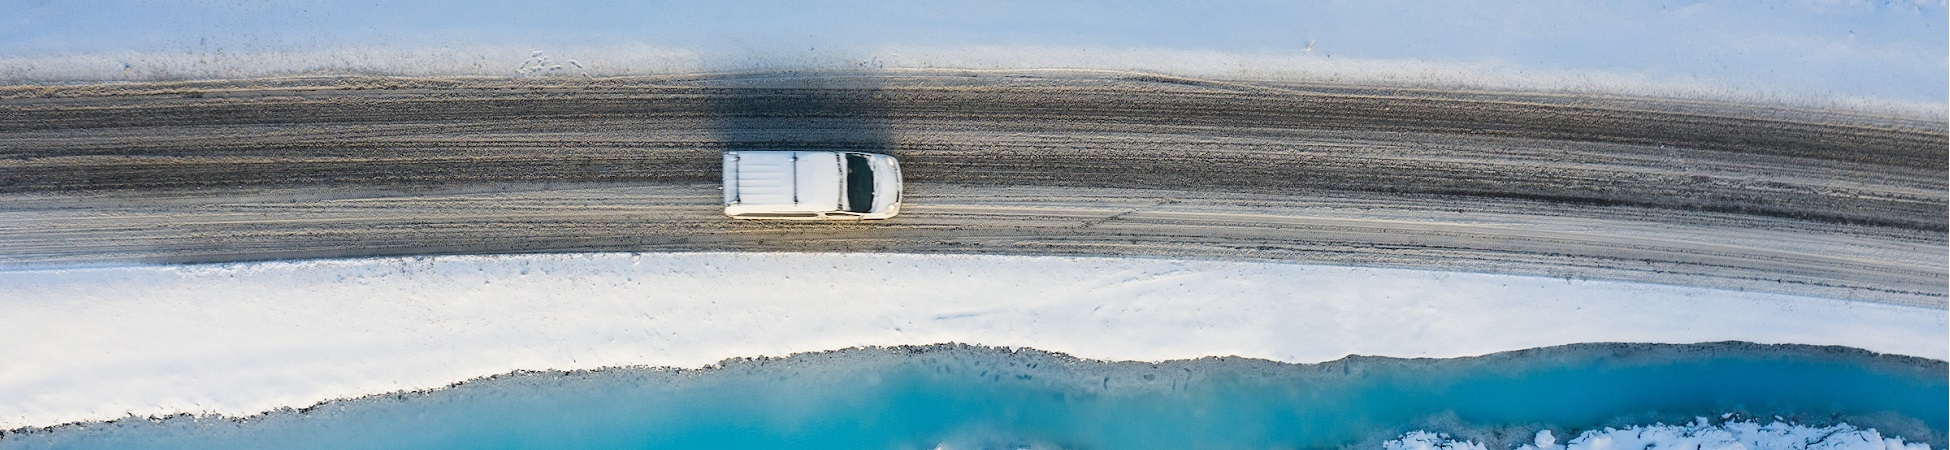 A drone shot of a car driving on a lonely road next to a blue lagoon in a snowy lava landscape